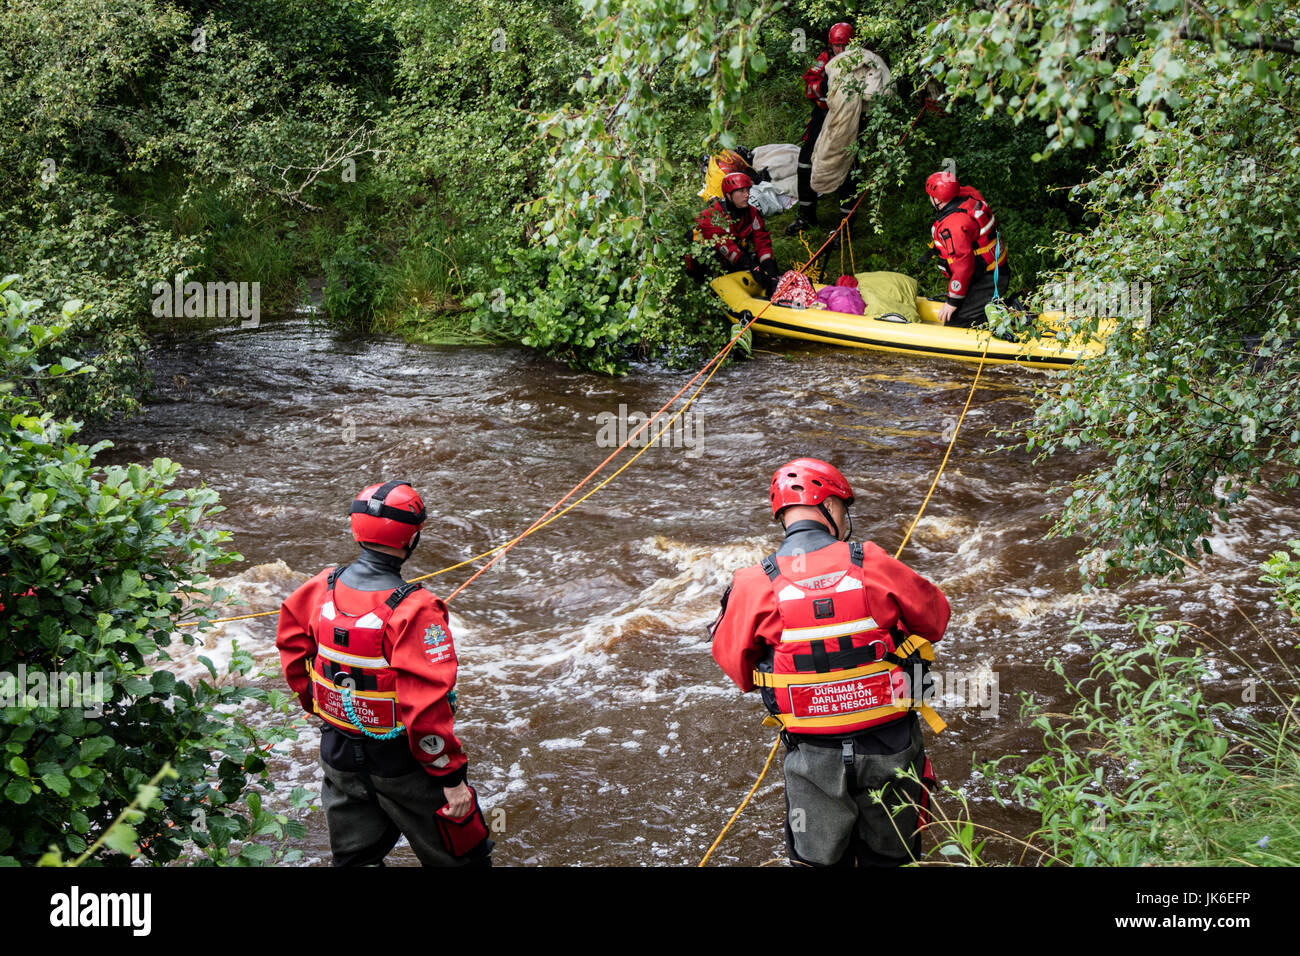 River Tees, Bowlees, Upper Teesdale, County Durham UK.  Saturday 22nd July 2017. UK Weather.  Emergency Services were called out to rescue four people who became trapped on an island in the River Tees this afternoon after torrential rain caused a flash flood which cut them off.  Nobody was hurt in the incident, which lasted approximately 1 hour.  Credit: David Forster/Alamy Live News. Stock Photo